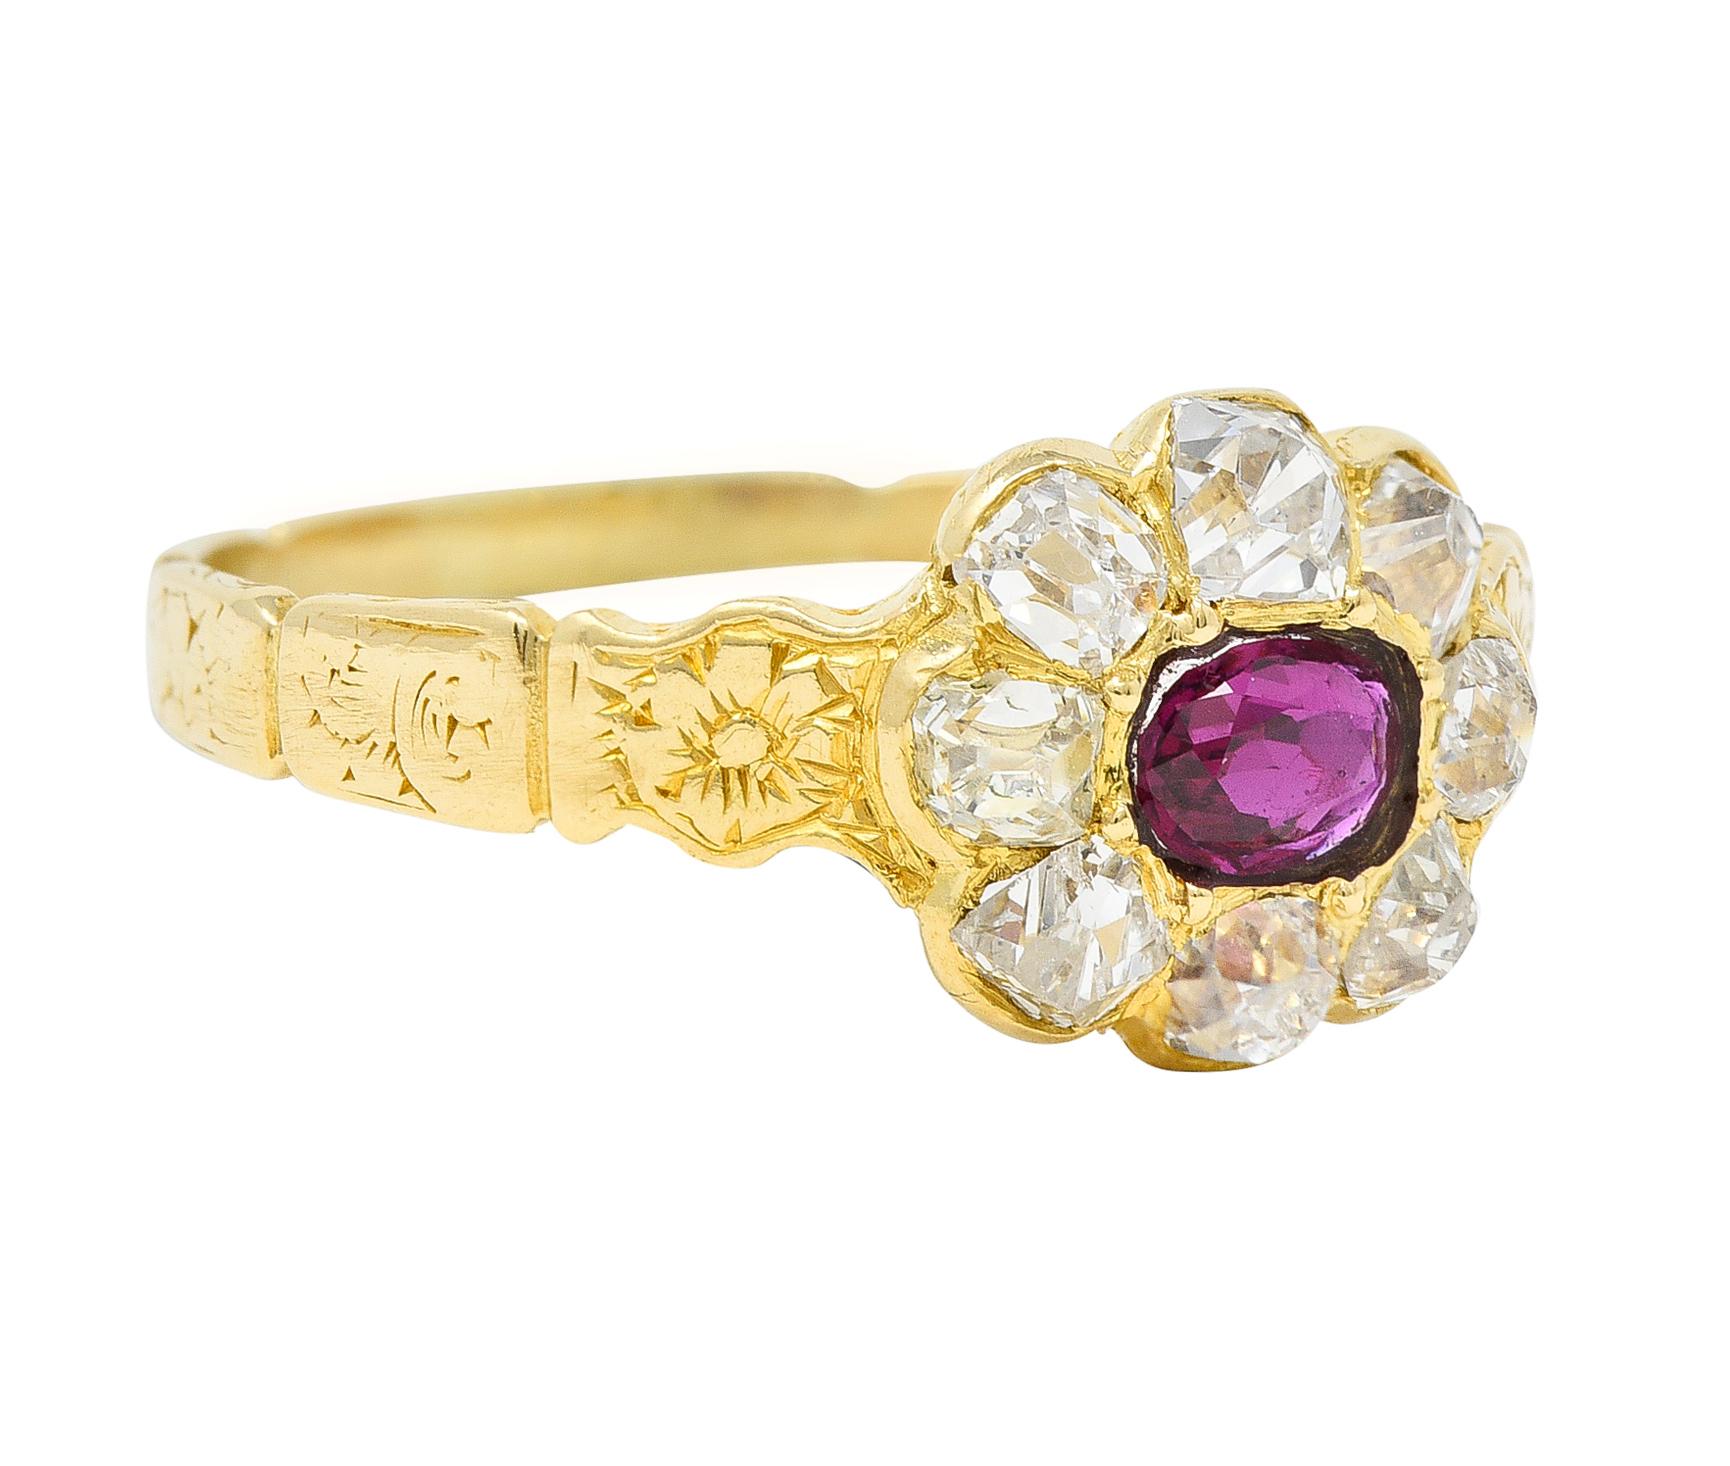 Centering an elongated cushion cut ruby weighing approximately 0.40 carat
Transparent medium red - bead set east to west with a halo surround
Comprised of old mine cut diamonds weighing approximately 0.48 carat total
G/H in color and clarity